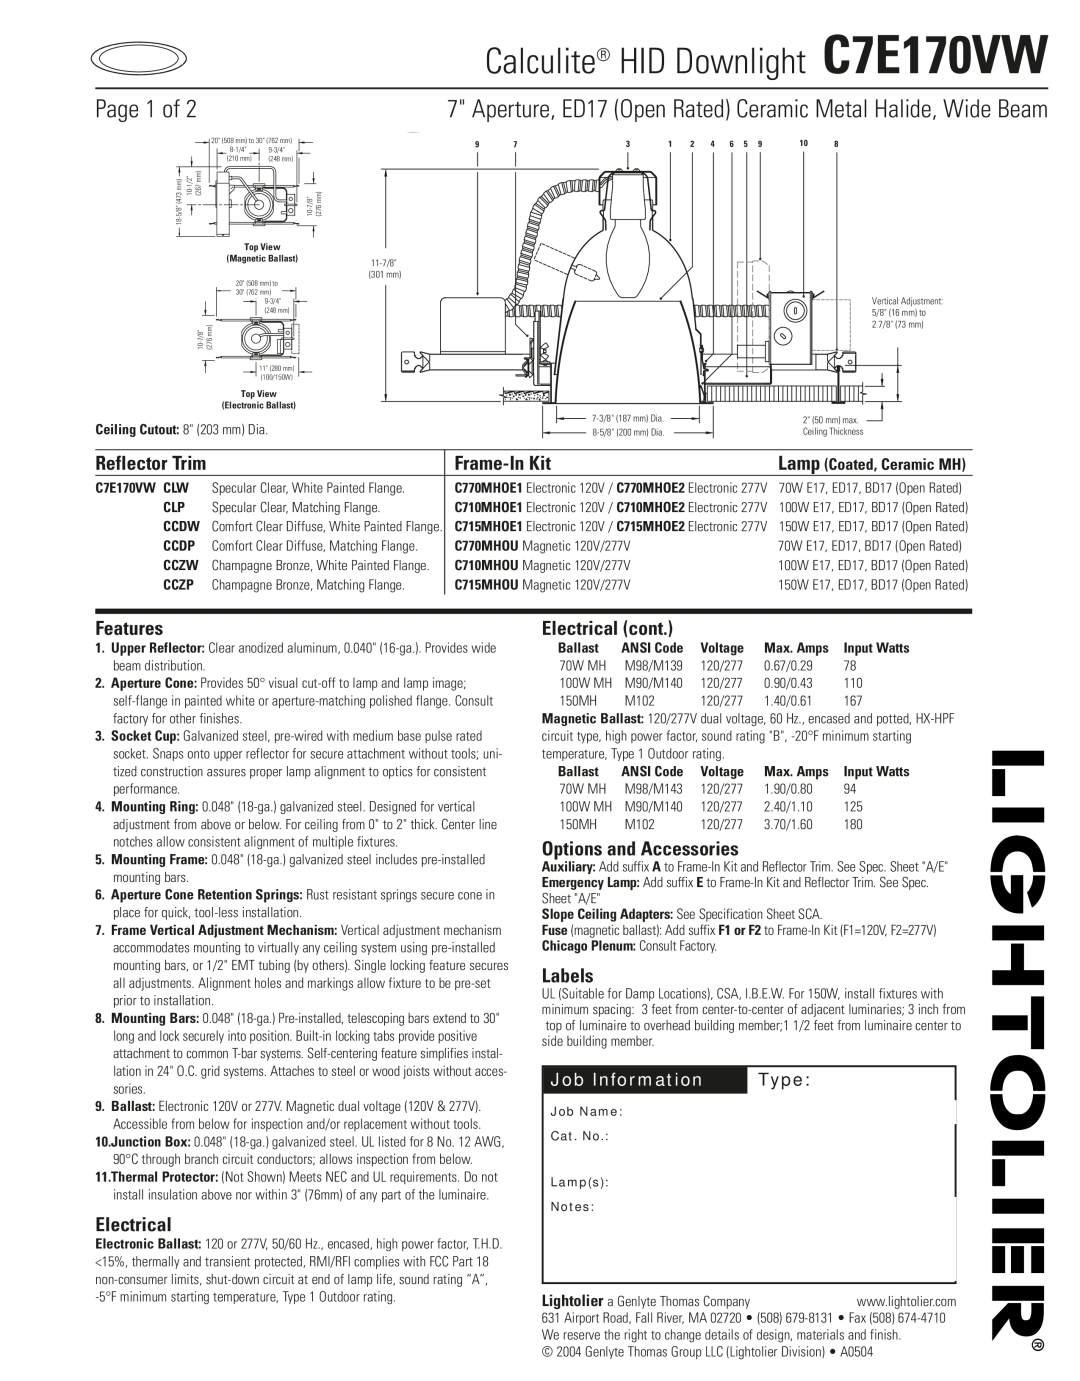 Lightolier specifications Page 1 of, Job Information, Type, Calculite HID Downlight C7E170VW, Frame-InKit, Features 